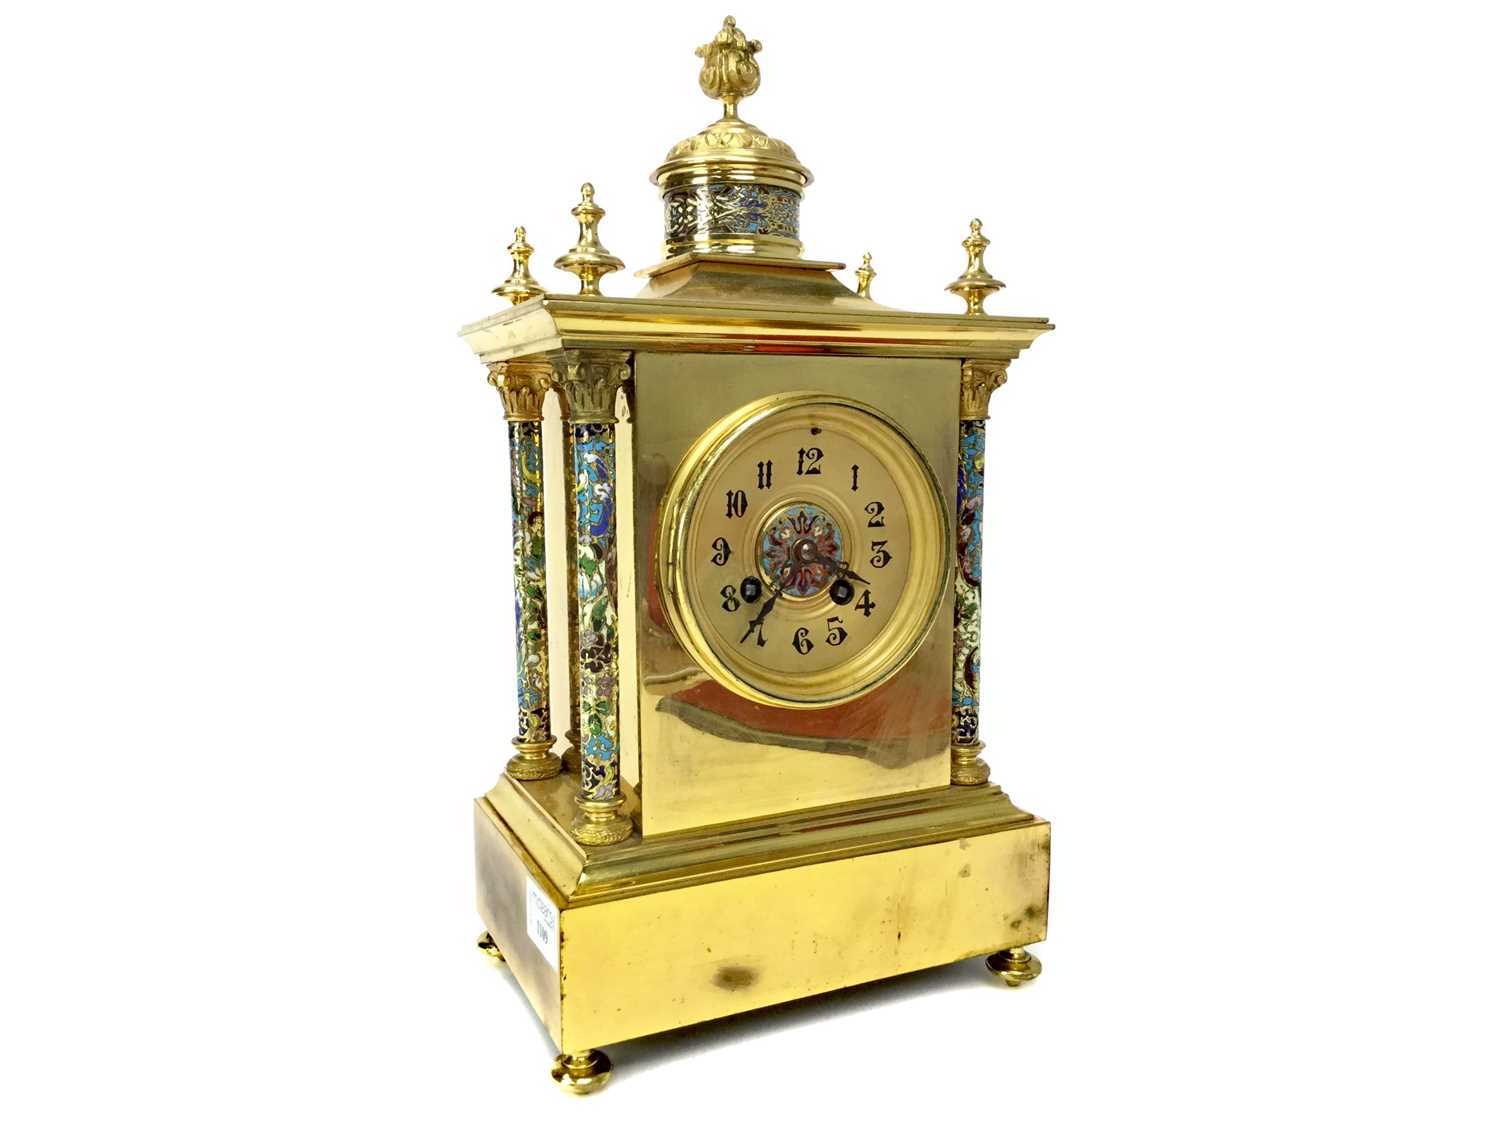 Lot 1109 - A LATE 19TH CENTURY FRENCH BRASS AND CHAMPLEVE ENAMEL CLOCK